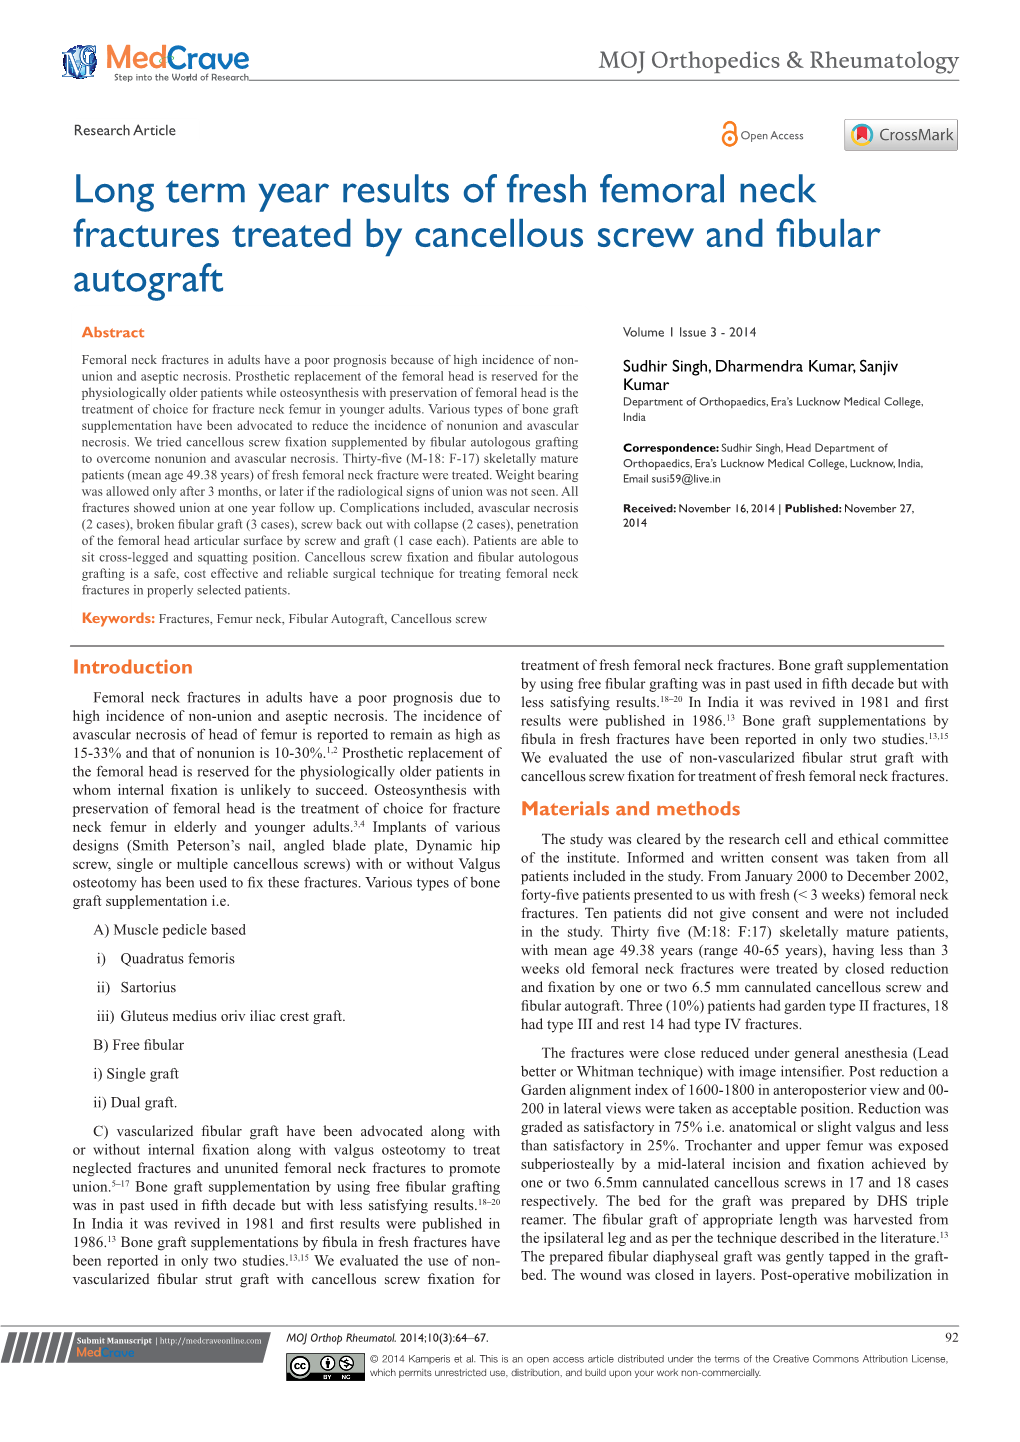 Long Term Year Results of Fresh Femoral Neck Fractures Treated by Cancellous Screw and Fibular Autograft